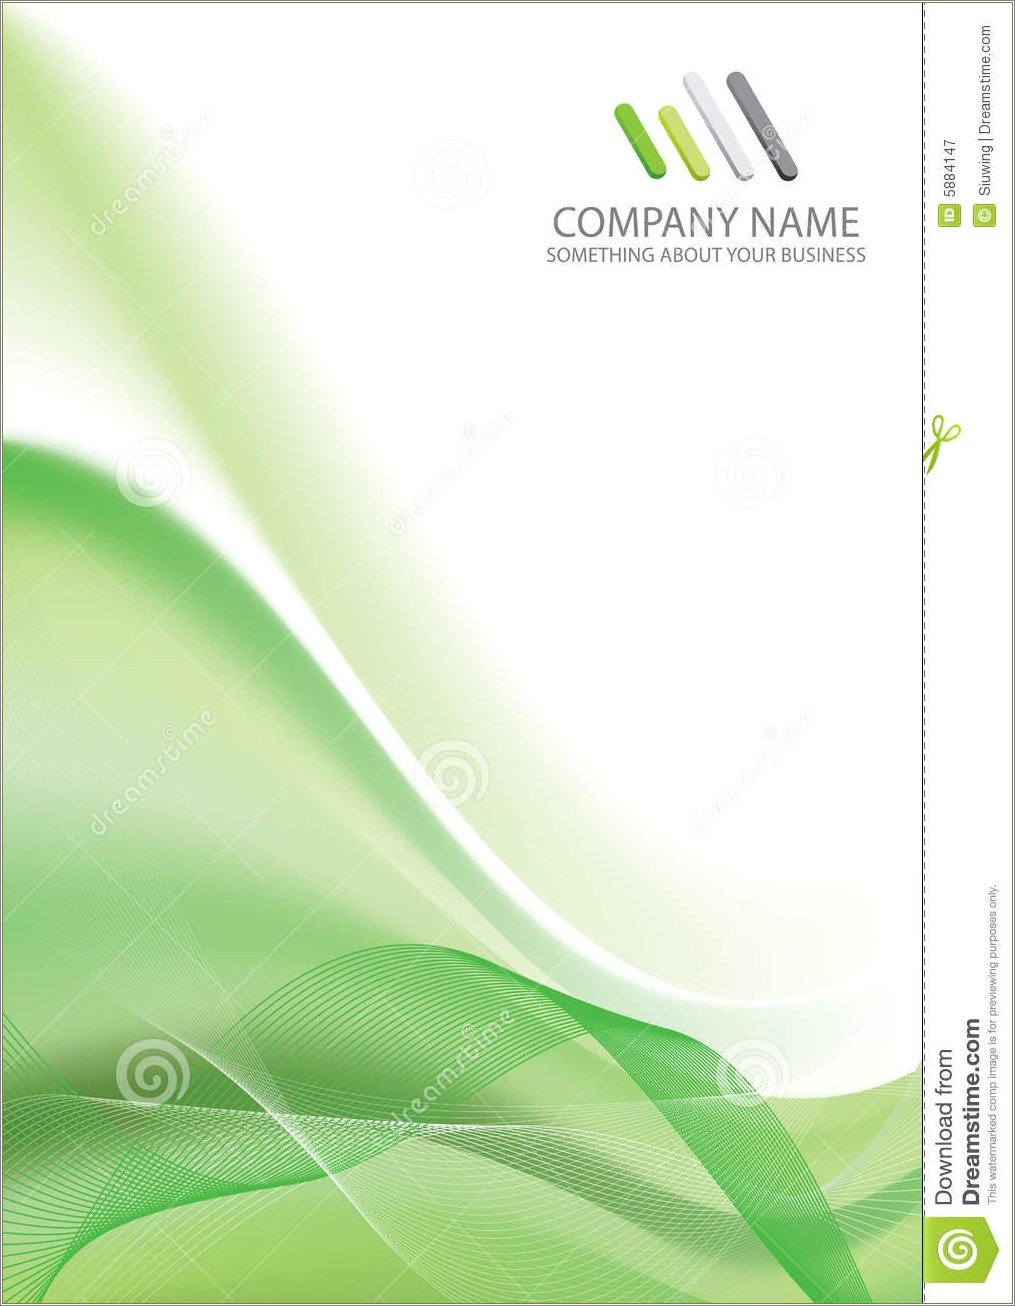 Free Download Word Document Cover Page Templates